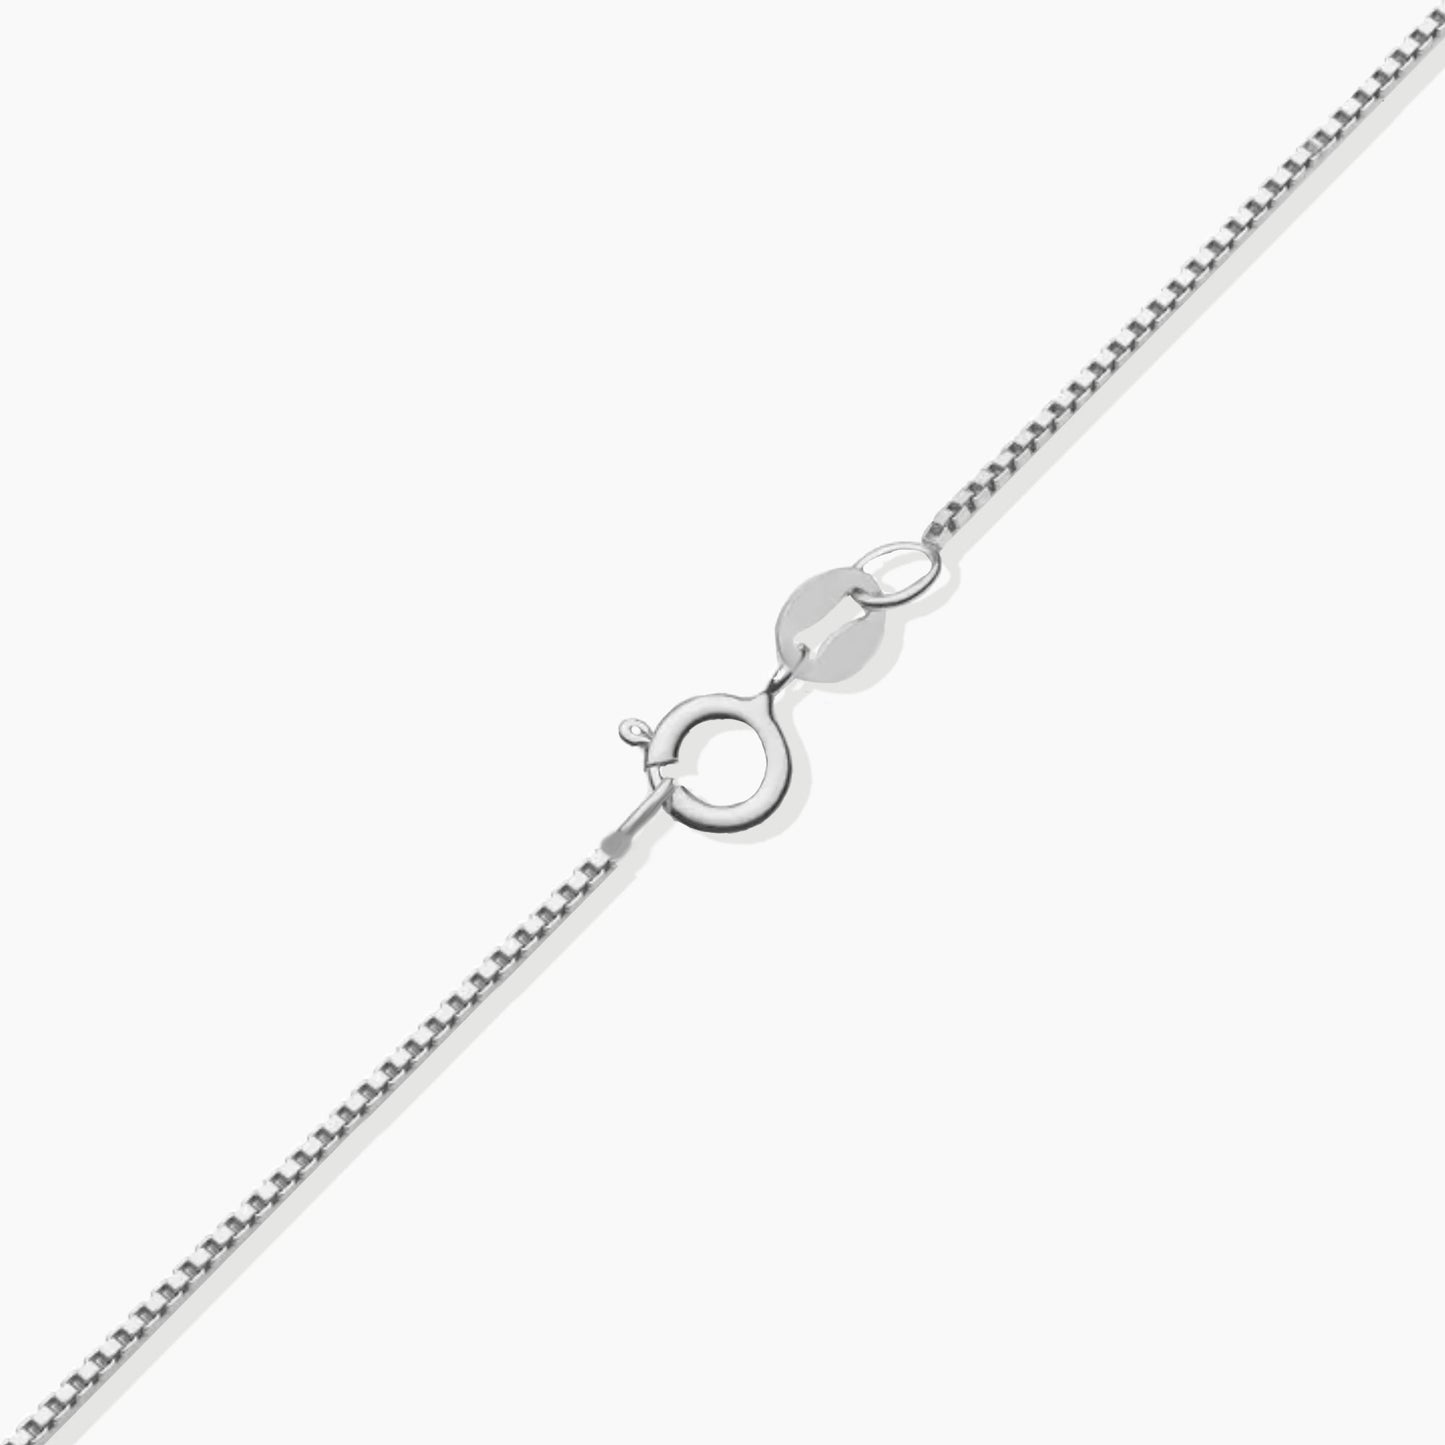 Irosk Tri Necklace in Sterling Silver -  Emerald